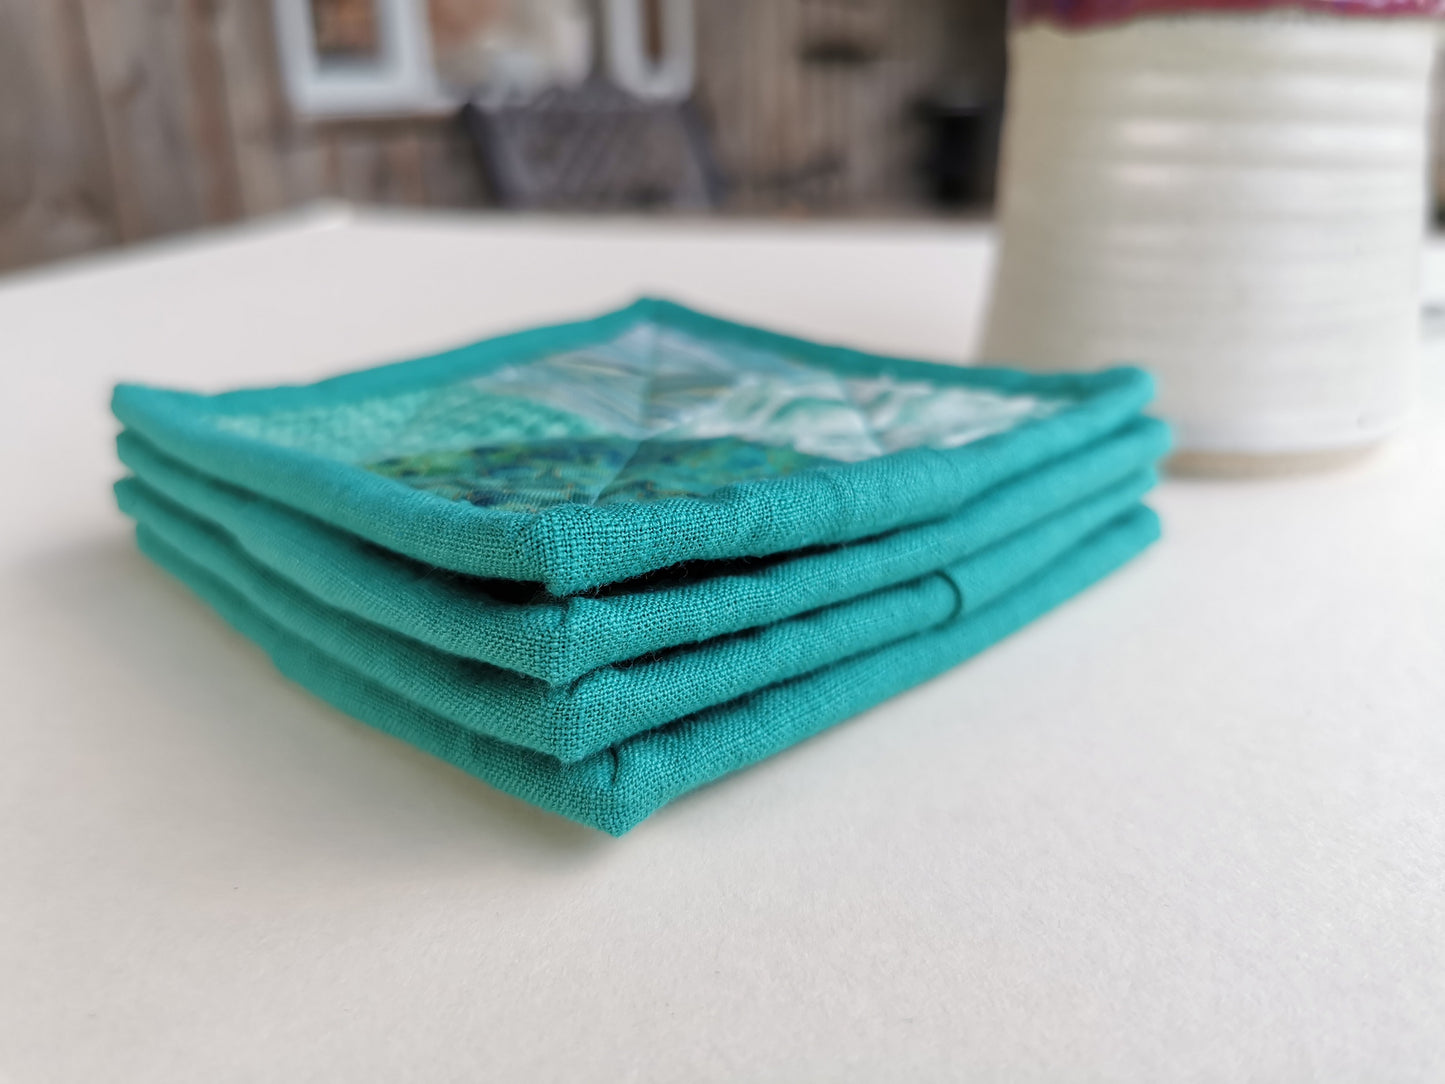 Quilted Teal Coasters